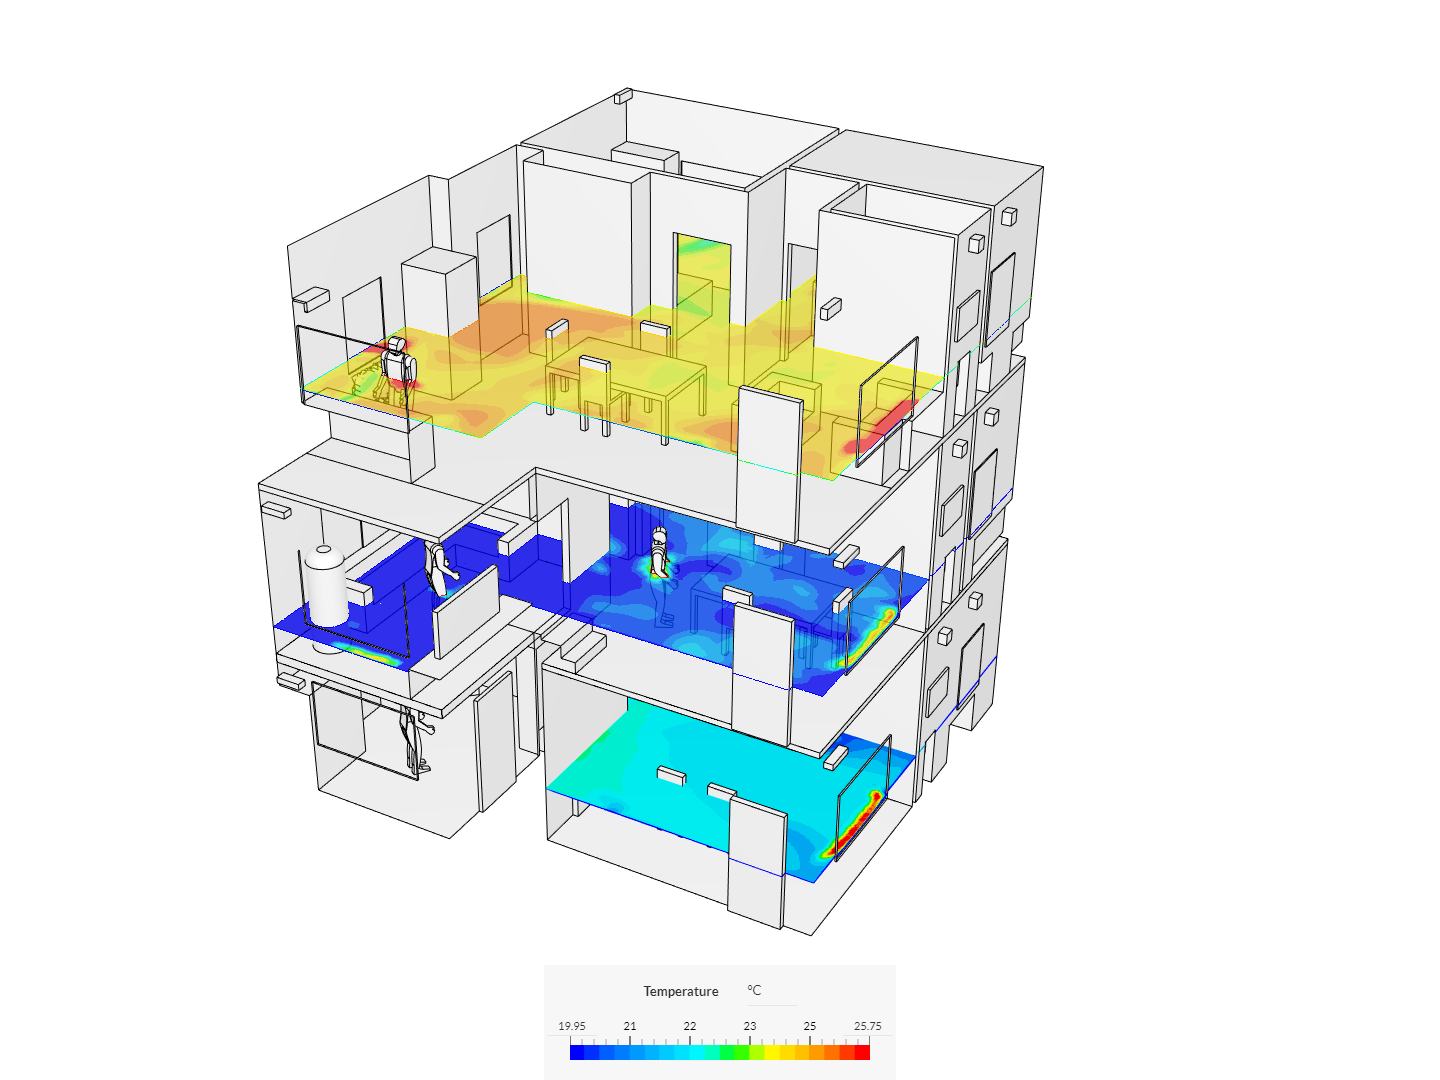 Learning Copy of Thermal Comfort Study for Multilevel Residential building. image